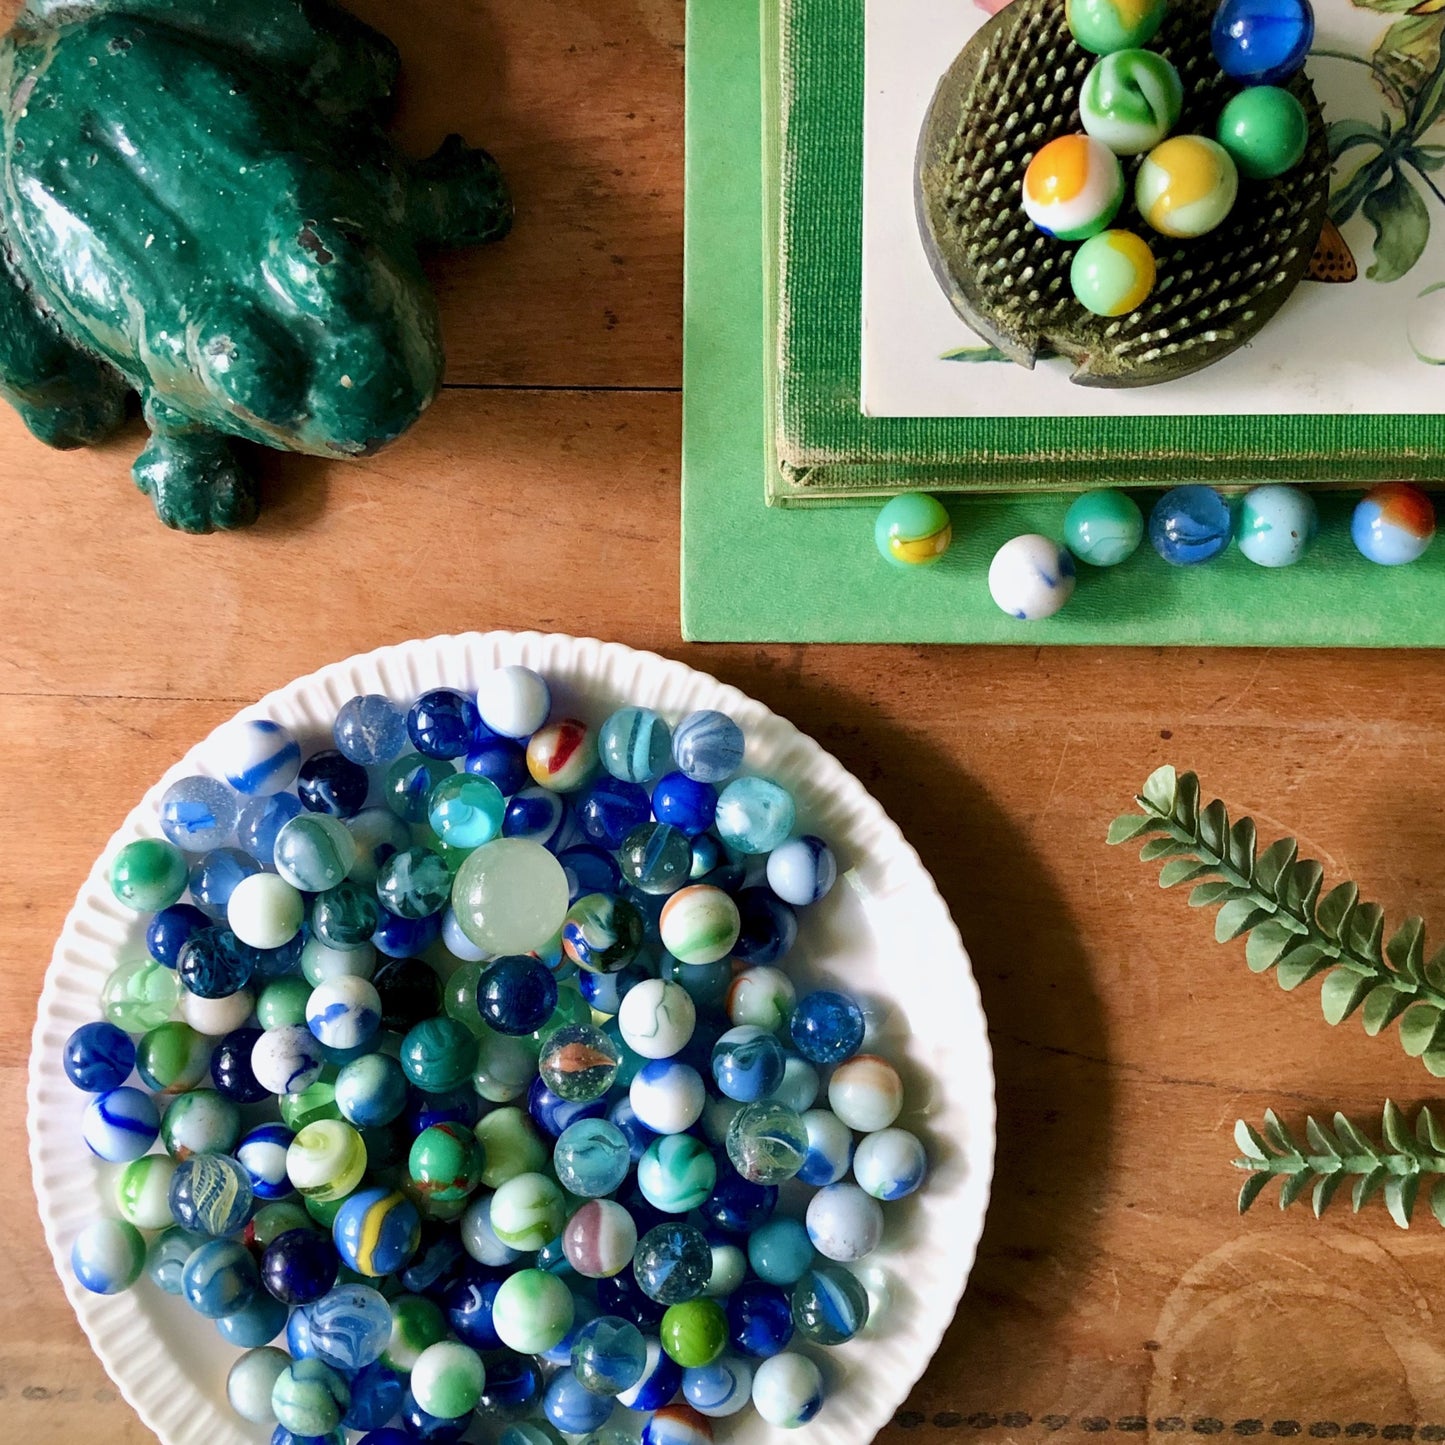 Antique and Vintage Marbles in Blue Green Coastal Colors, Set of 100